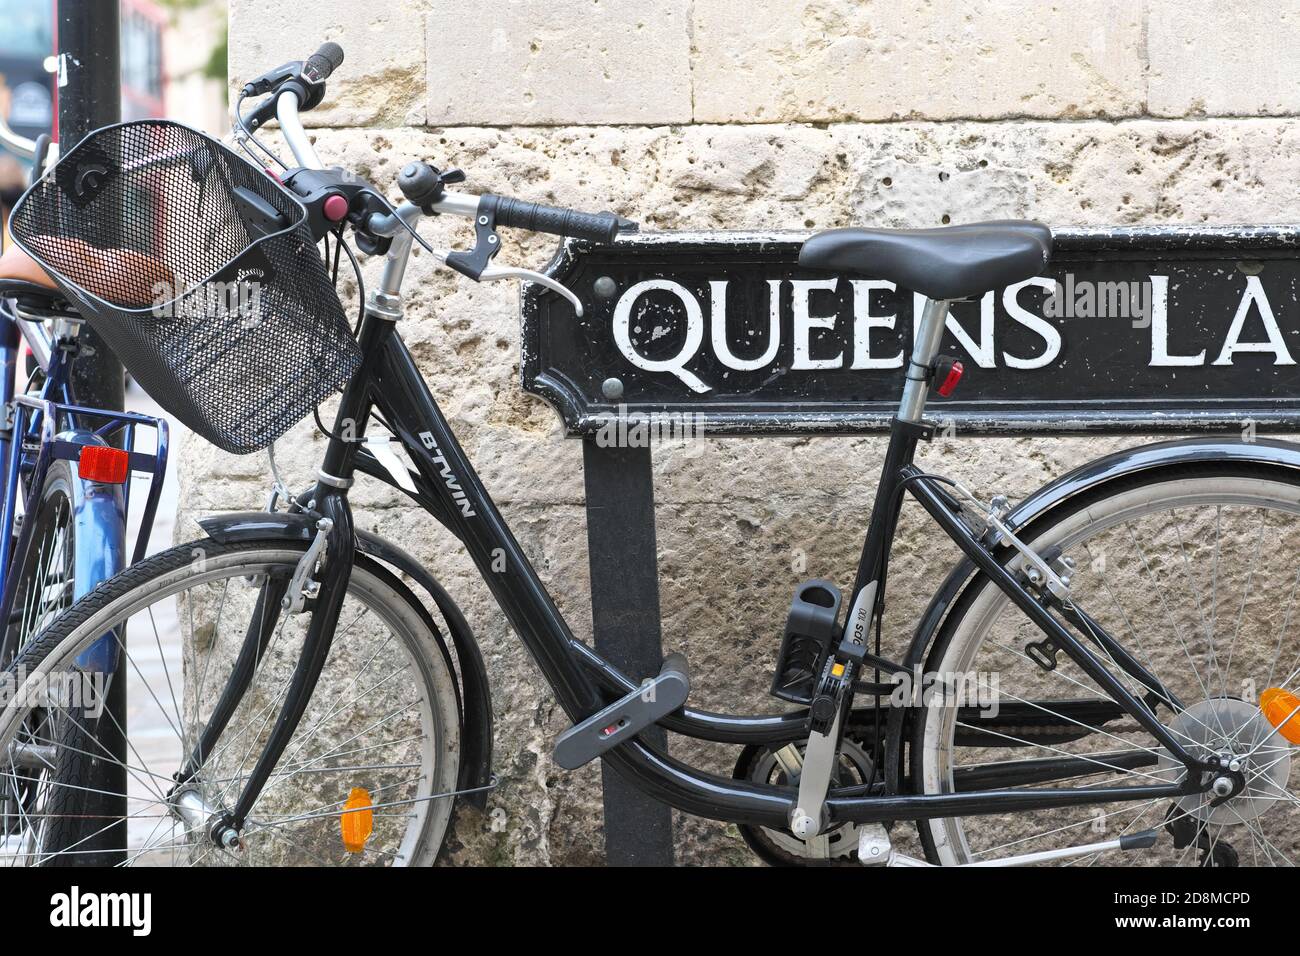 Oxford Oxfordshire UK - bicycles locked to a Queens Lane road sign in the University area of the city Stock Photo